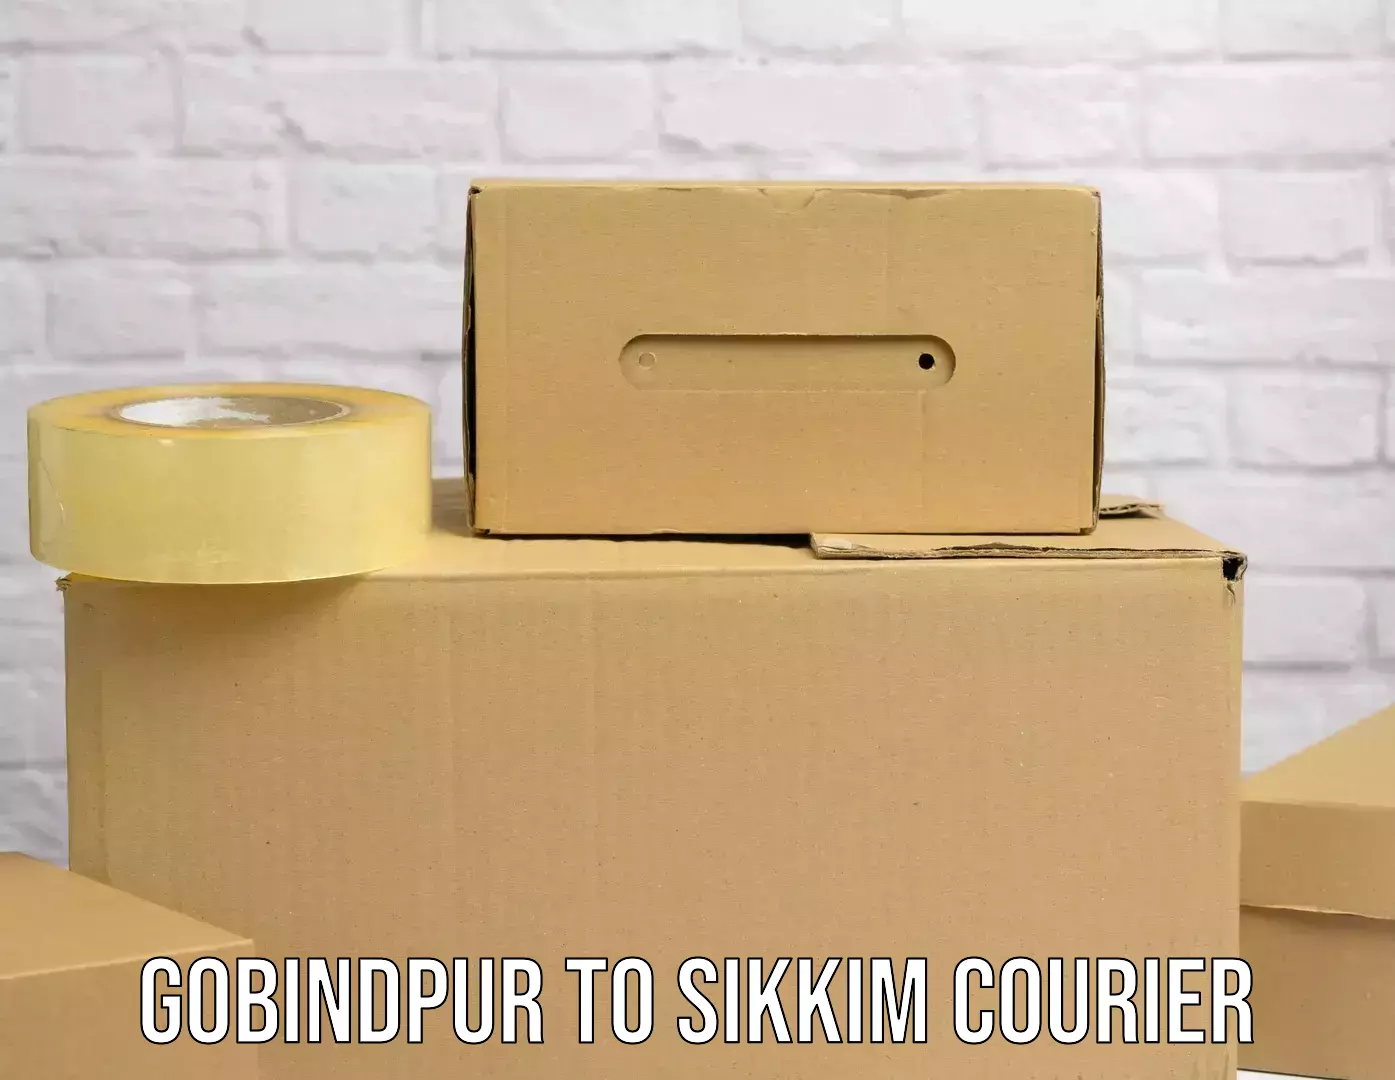 Fast shipping solutions Gobindpur to Pelling